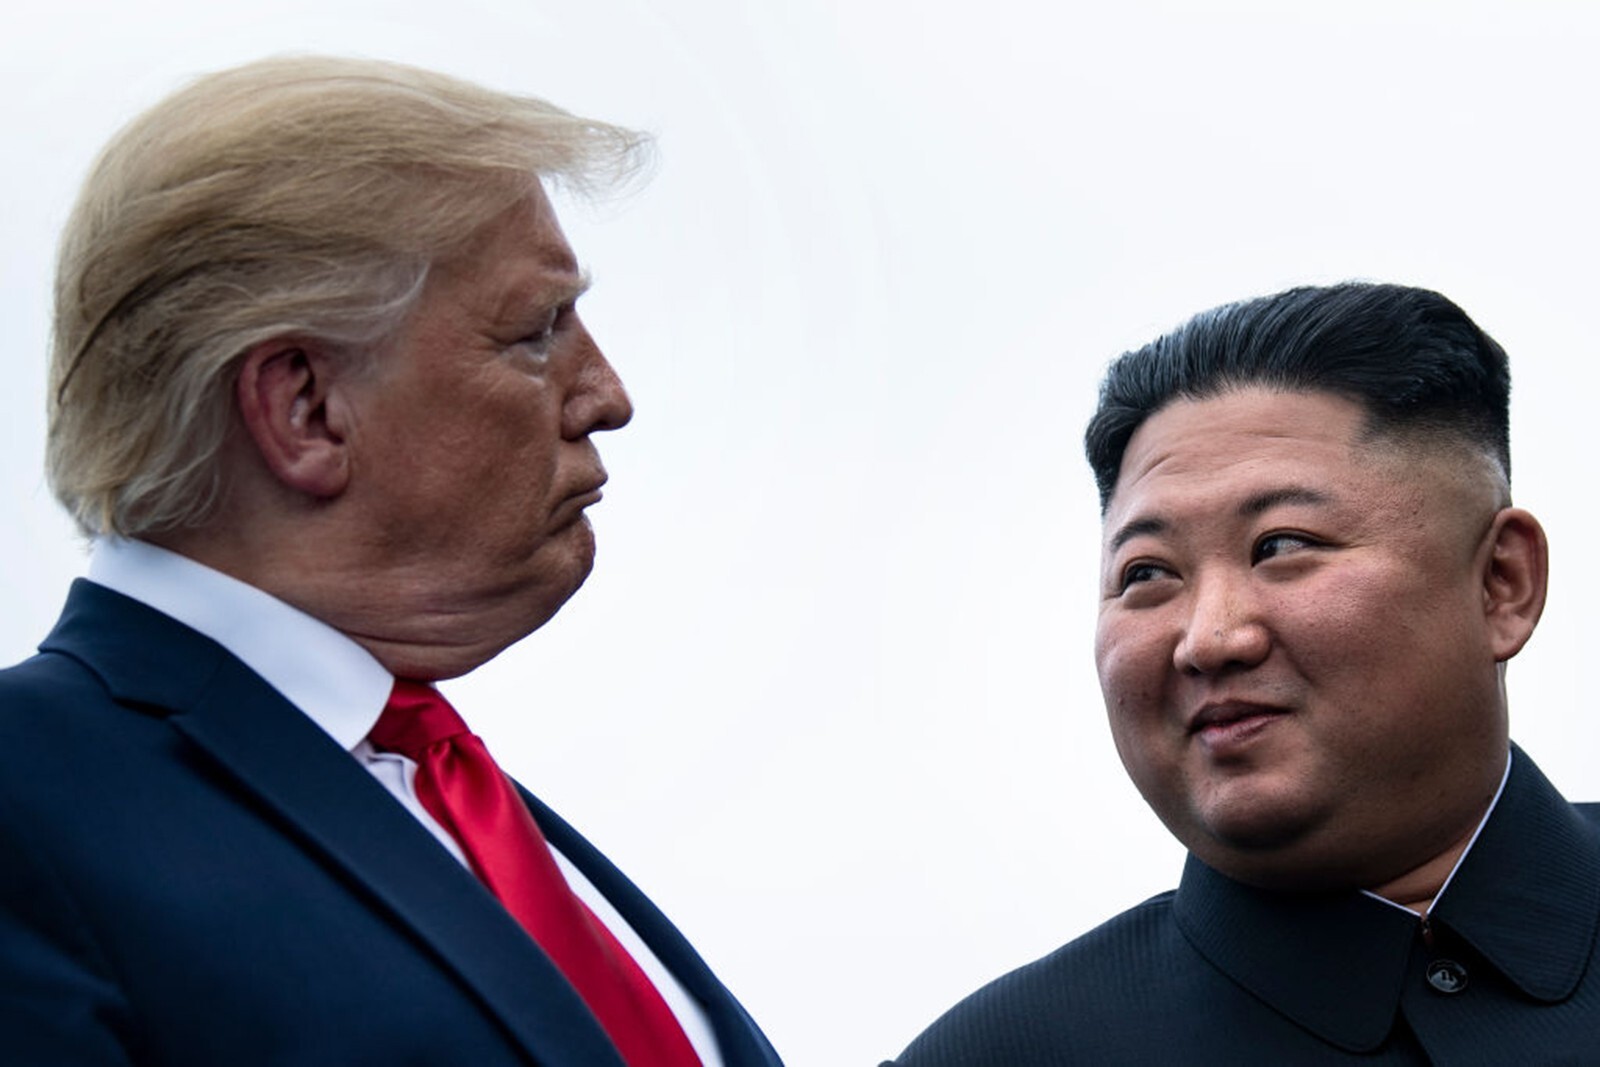 US President Donald Trump and North Korea's leader Kim Jong-un talk before a meeting in the demilitarised zone in June 2019. Photo: TNS